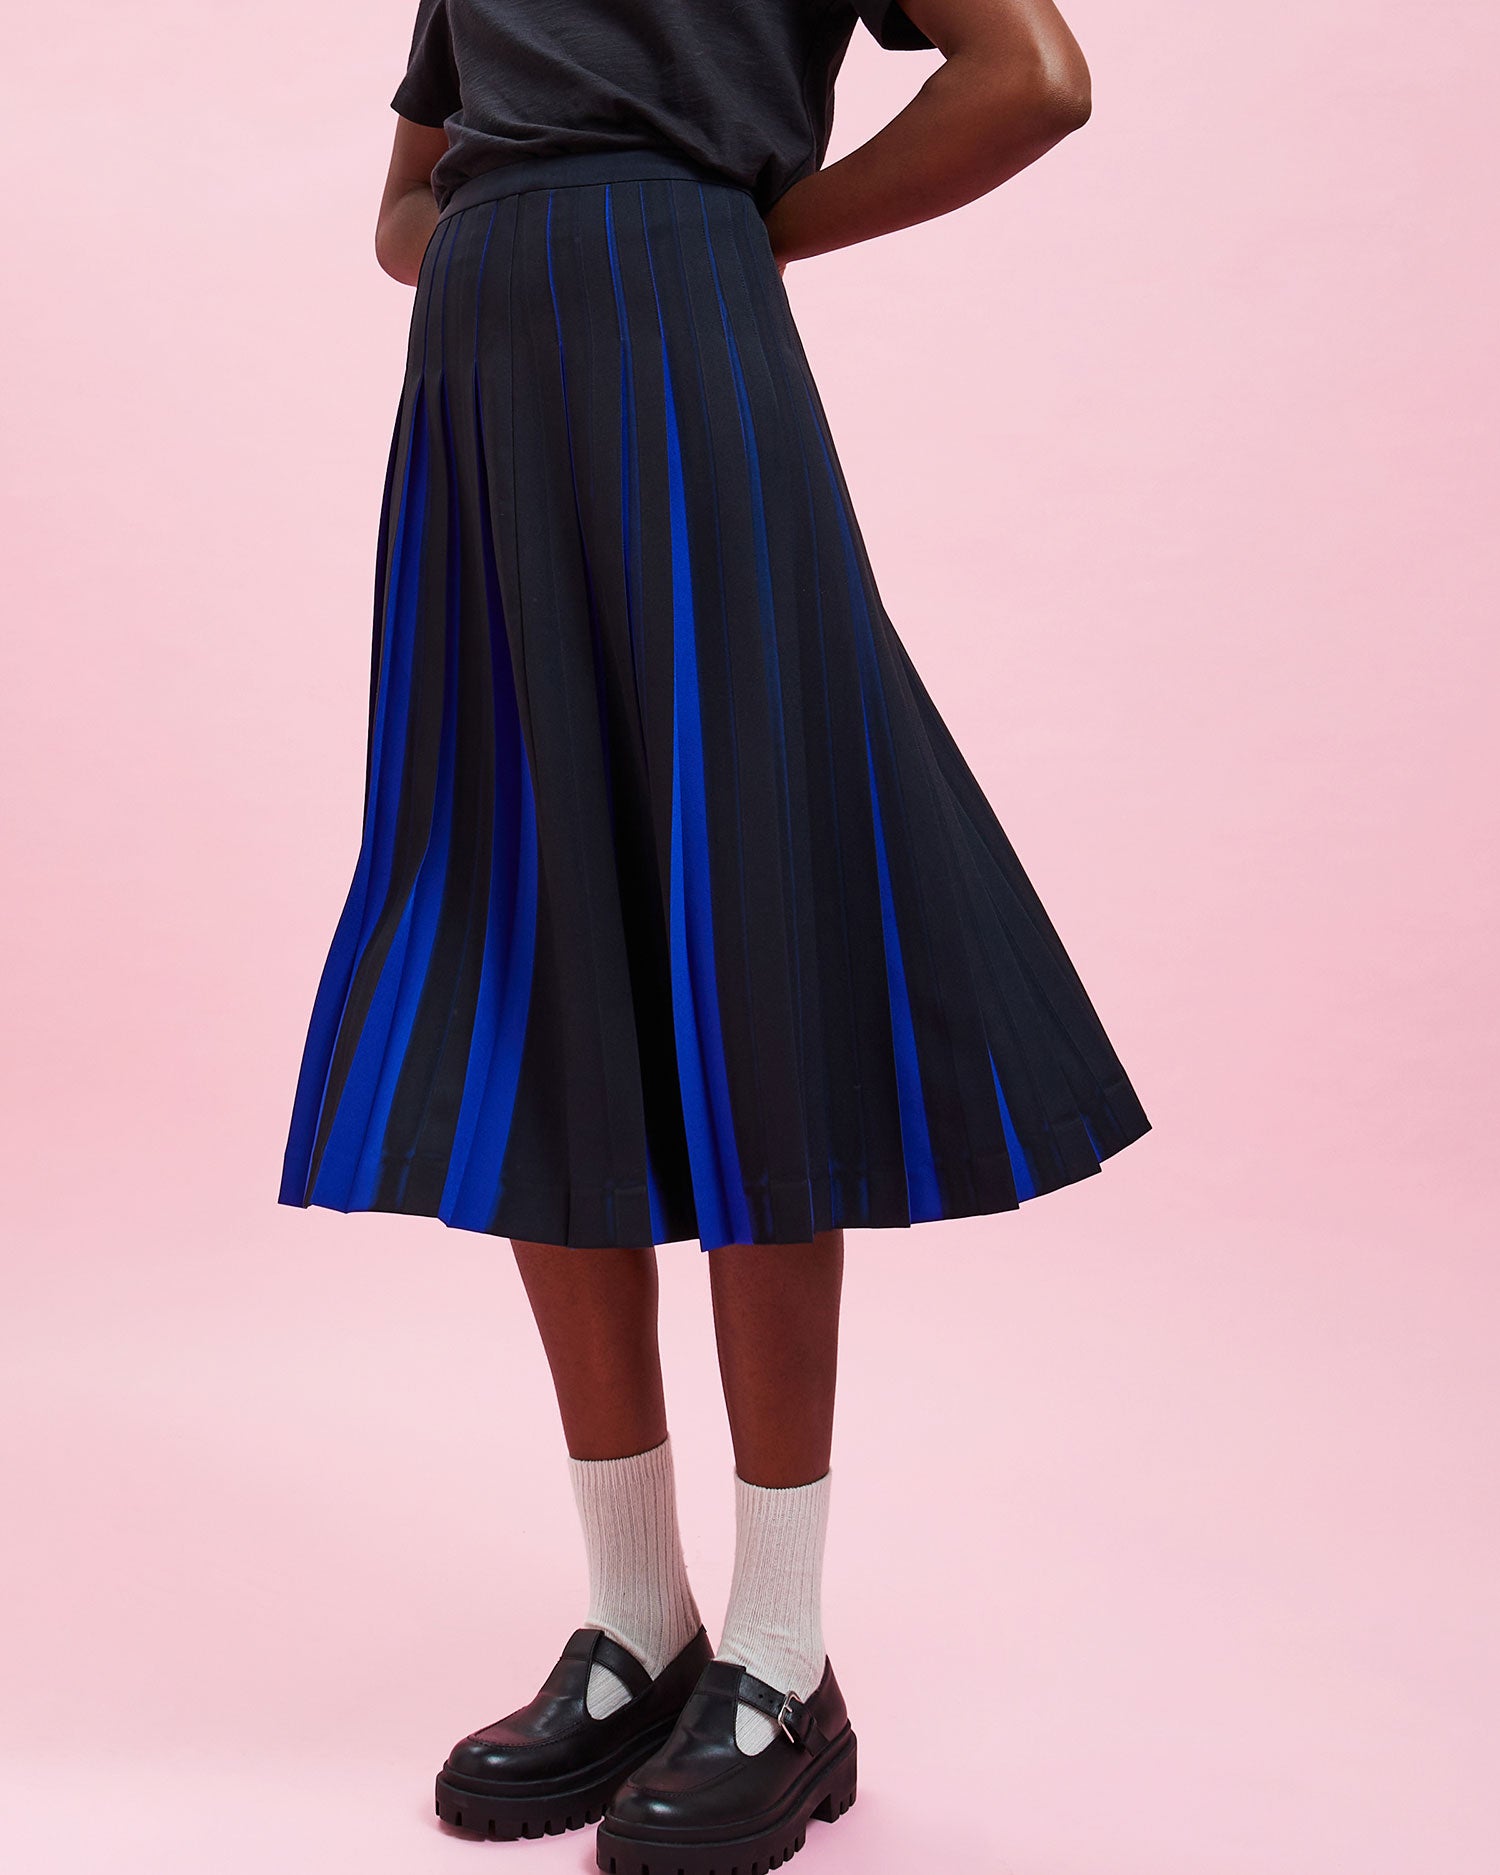 Model wearing the Navy & Black Stripes w/ French Blue Pleats Pleated Skirt with a black tee shirt tucked in 